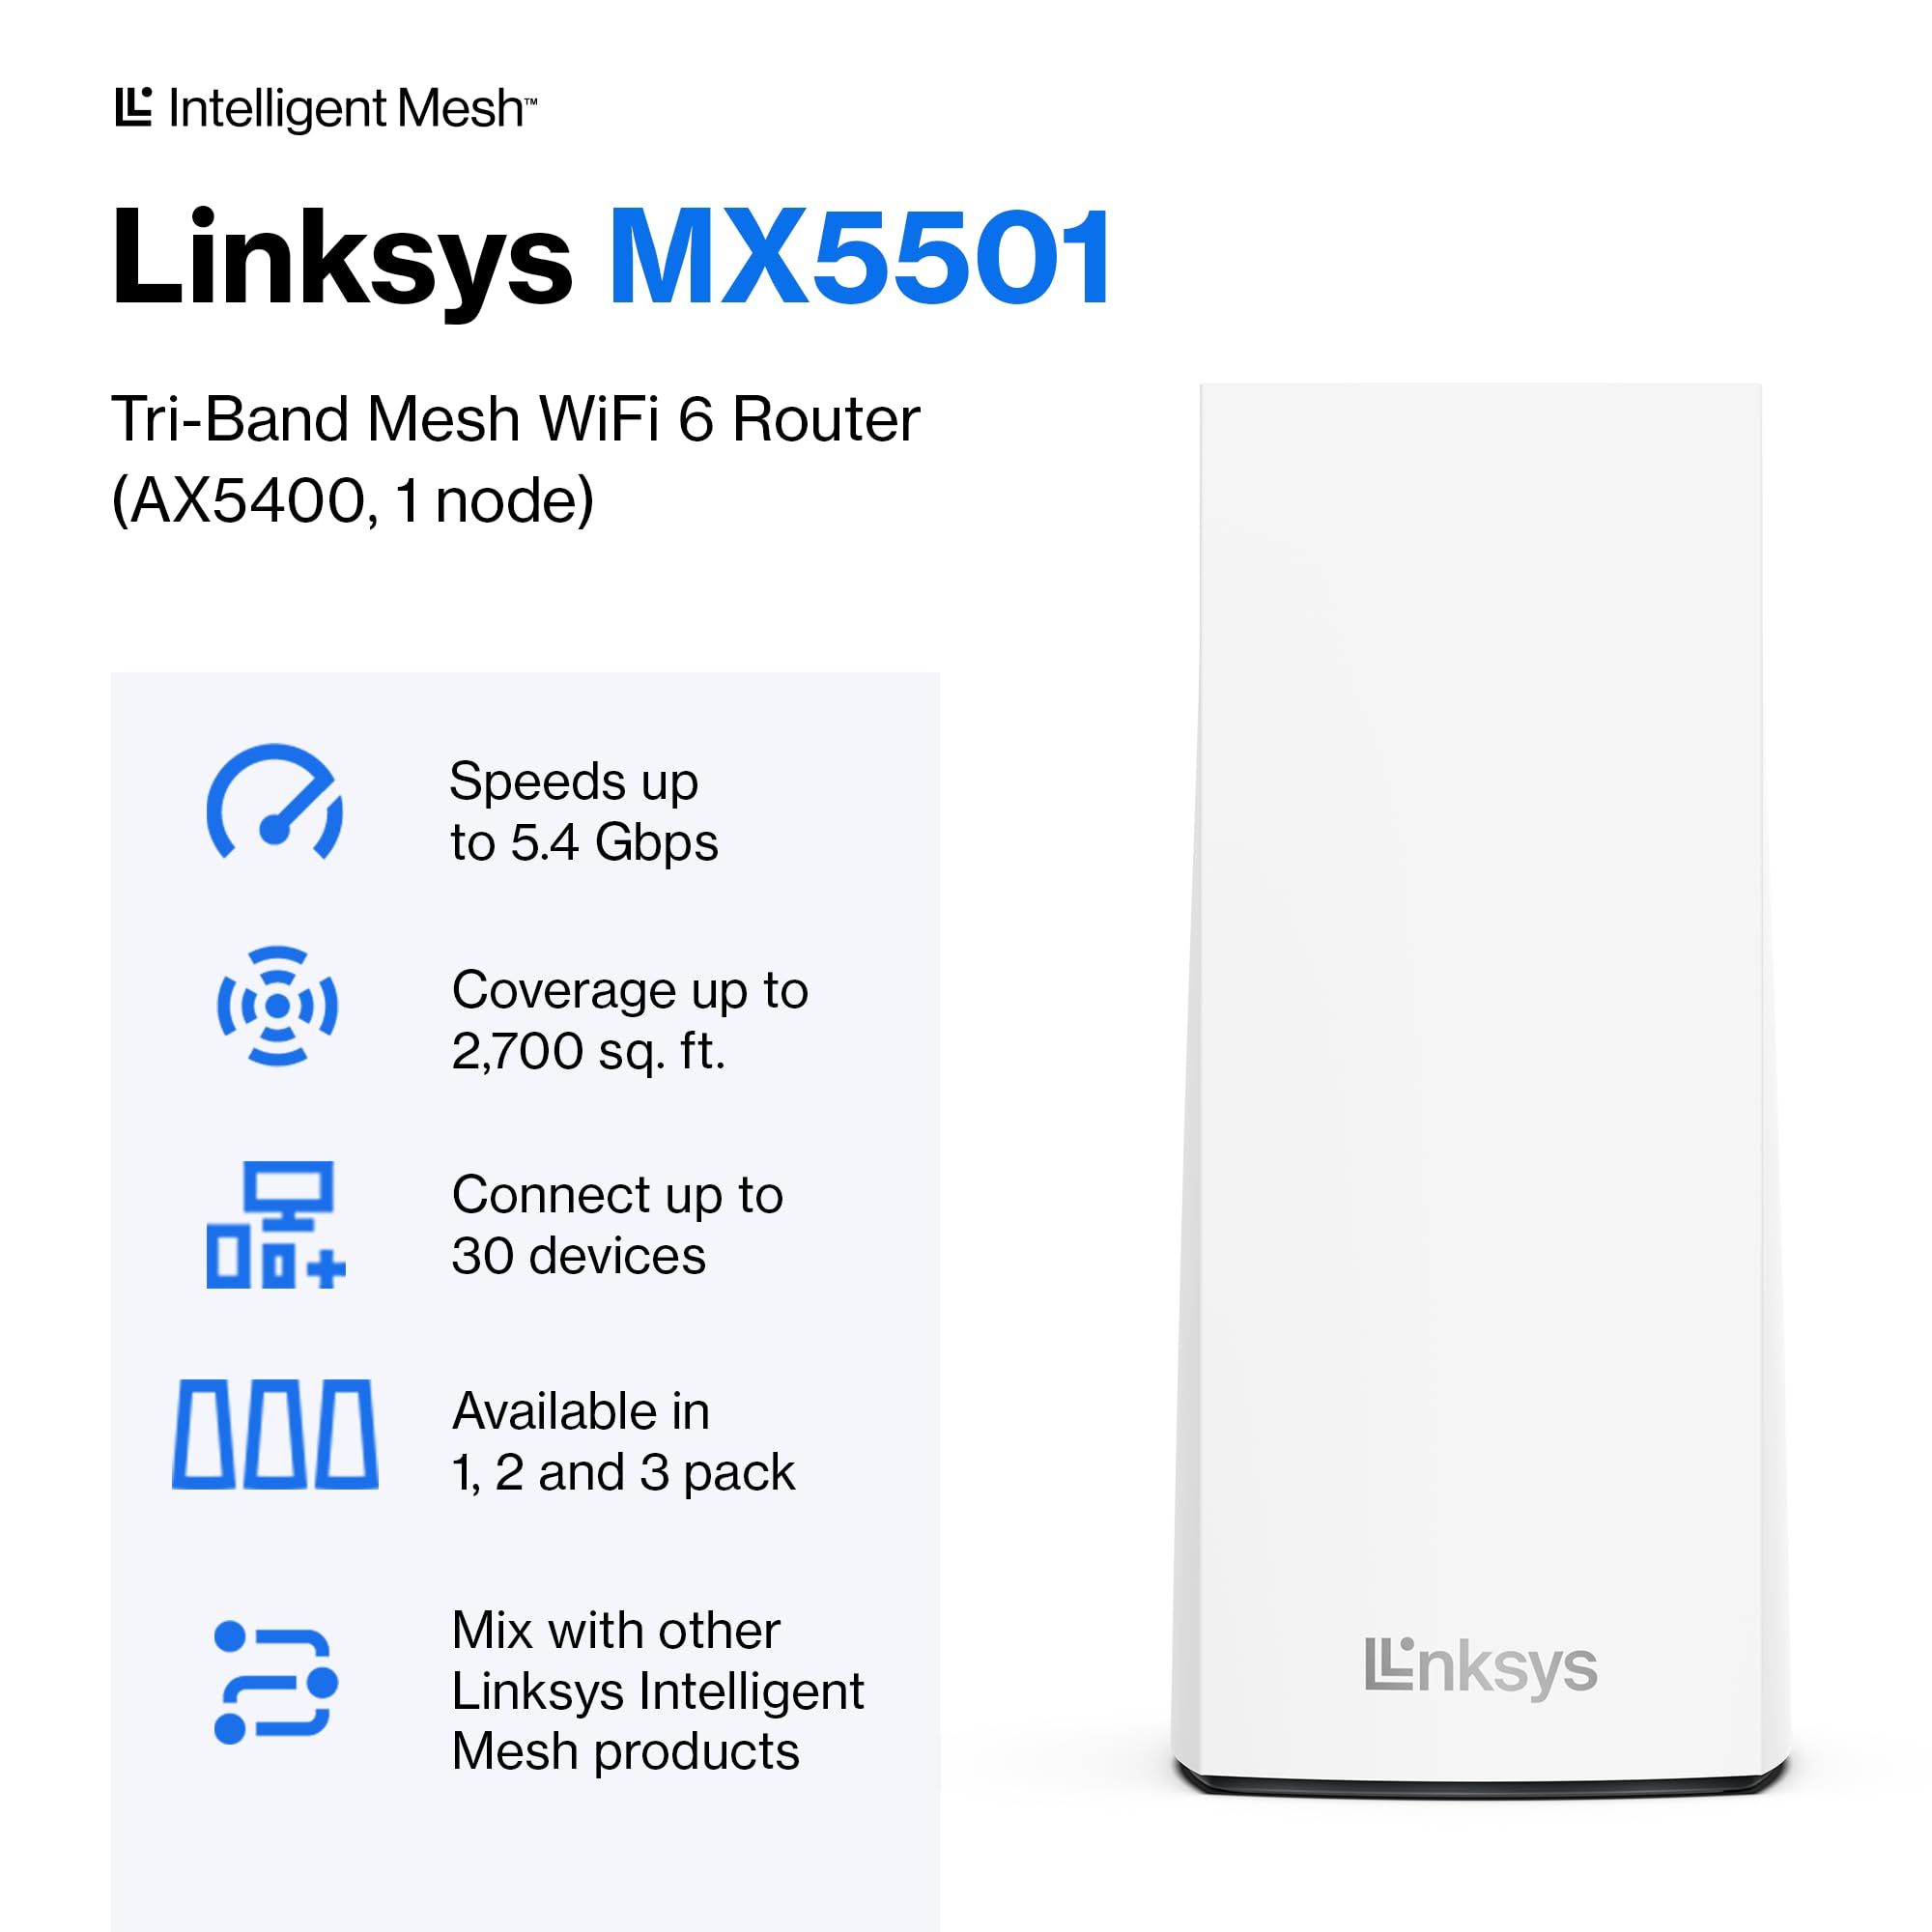 Linksys Atlas Pro 6 WiFi Router - AX5400 WiFi 6 Router - Dual-Band Mesh WiFi System - WiFi 6 Mesh Routers - WiFi Mesh Wireless Router - Connect 30+ Devices, 2,700 sq ft, MX5501-1 Pack